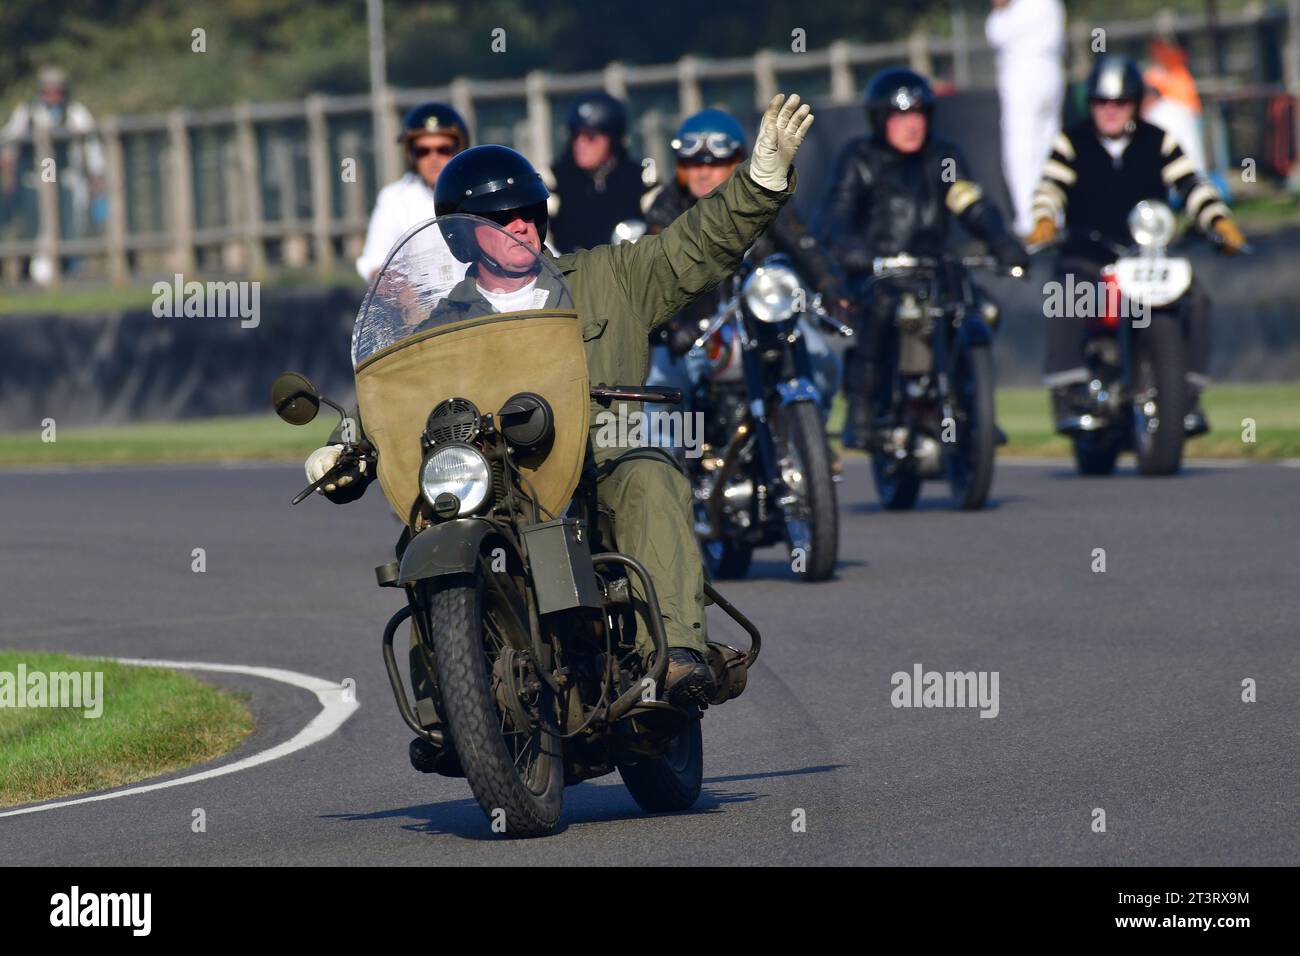 Military motorcycle, Track Parade - Motorcycle Celebration, circa 200 bikes featured in the morning parade laps, including sidecar outfits and motor t Stock Photo